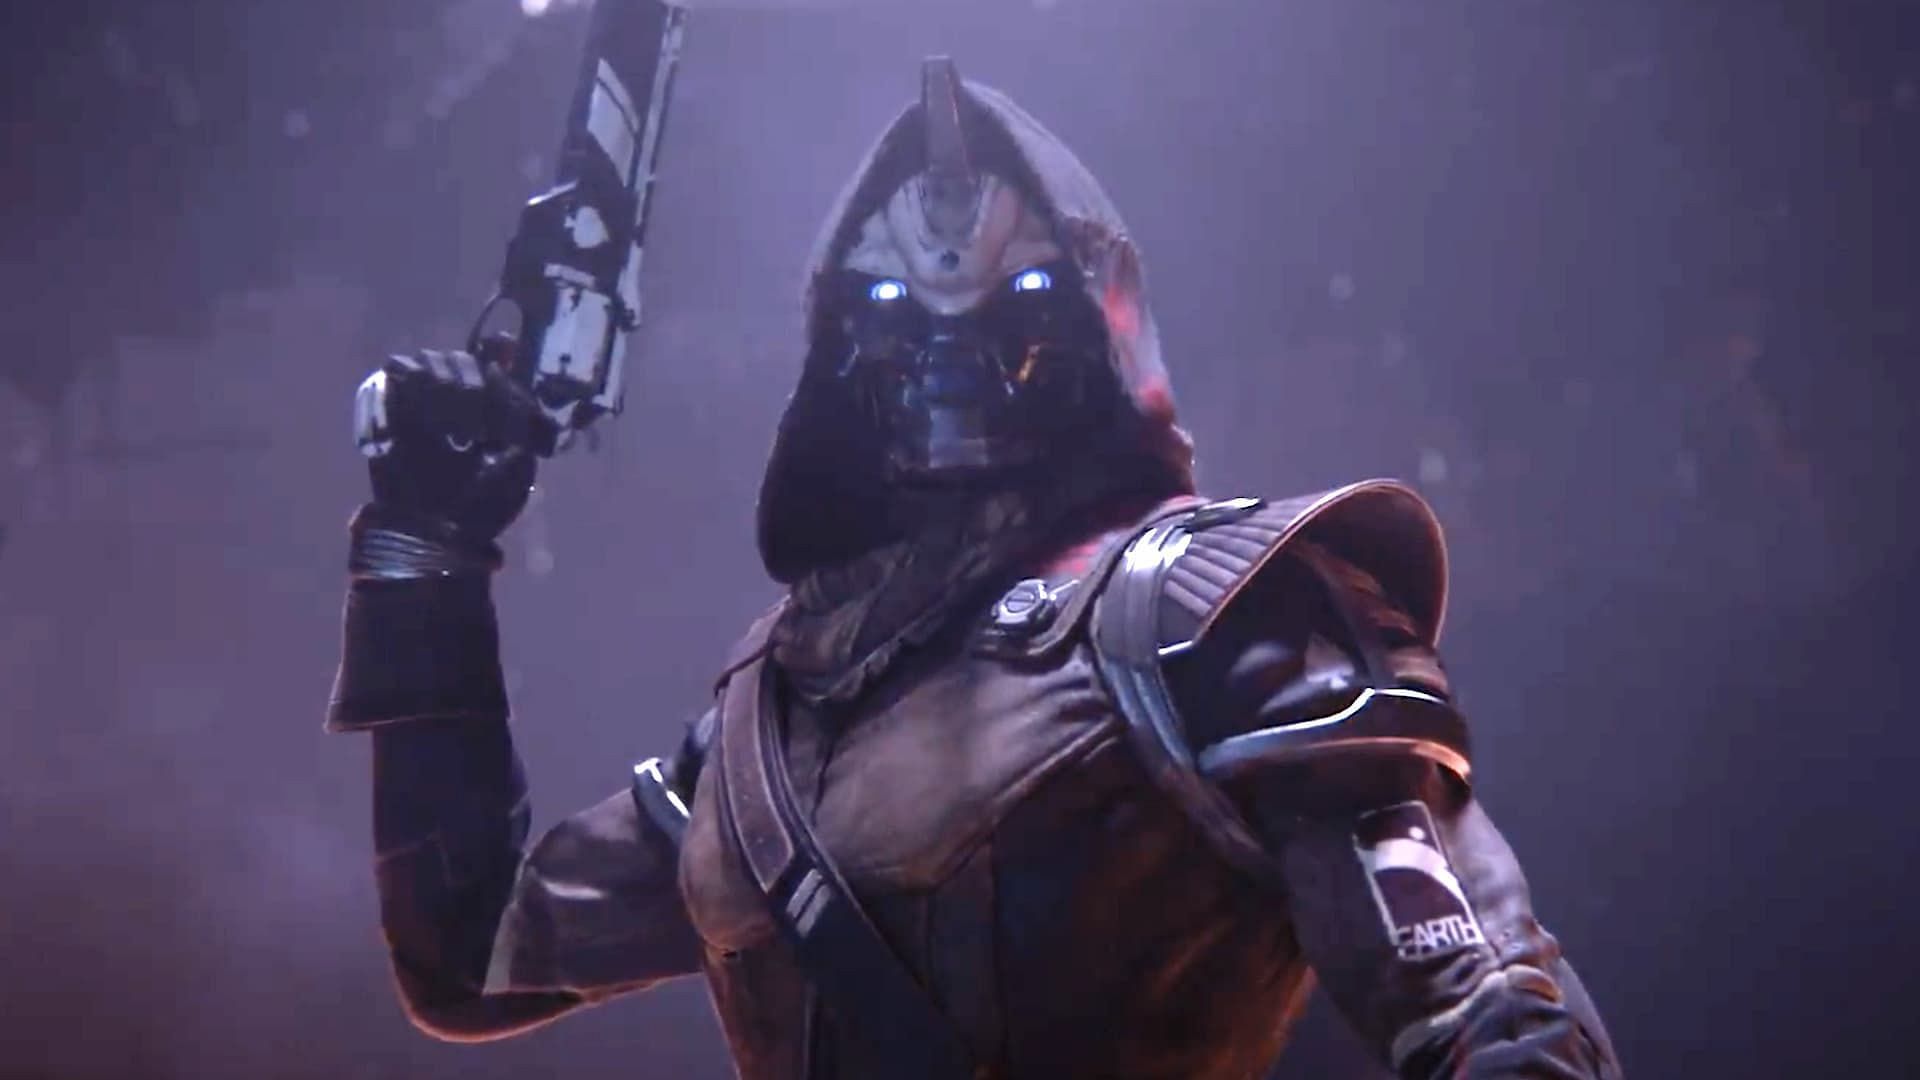 Cayde-6 was one of the most popular characters in the game (Image via Bungie)